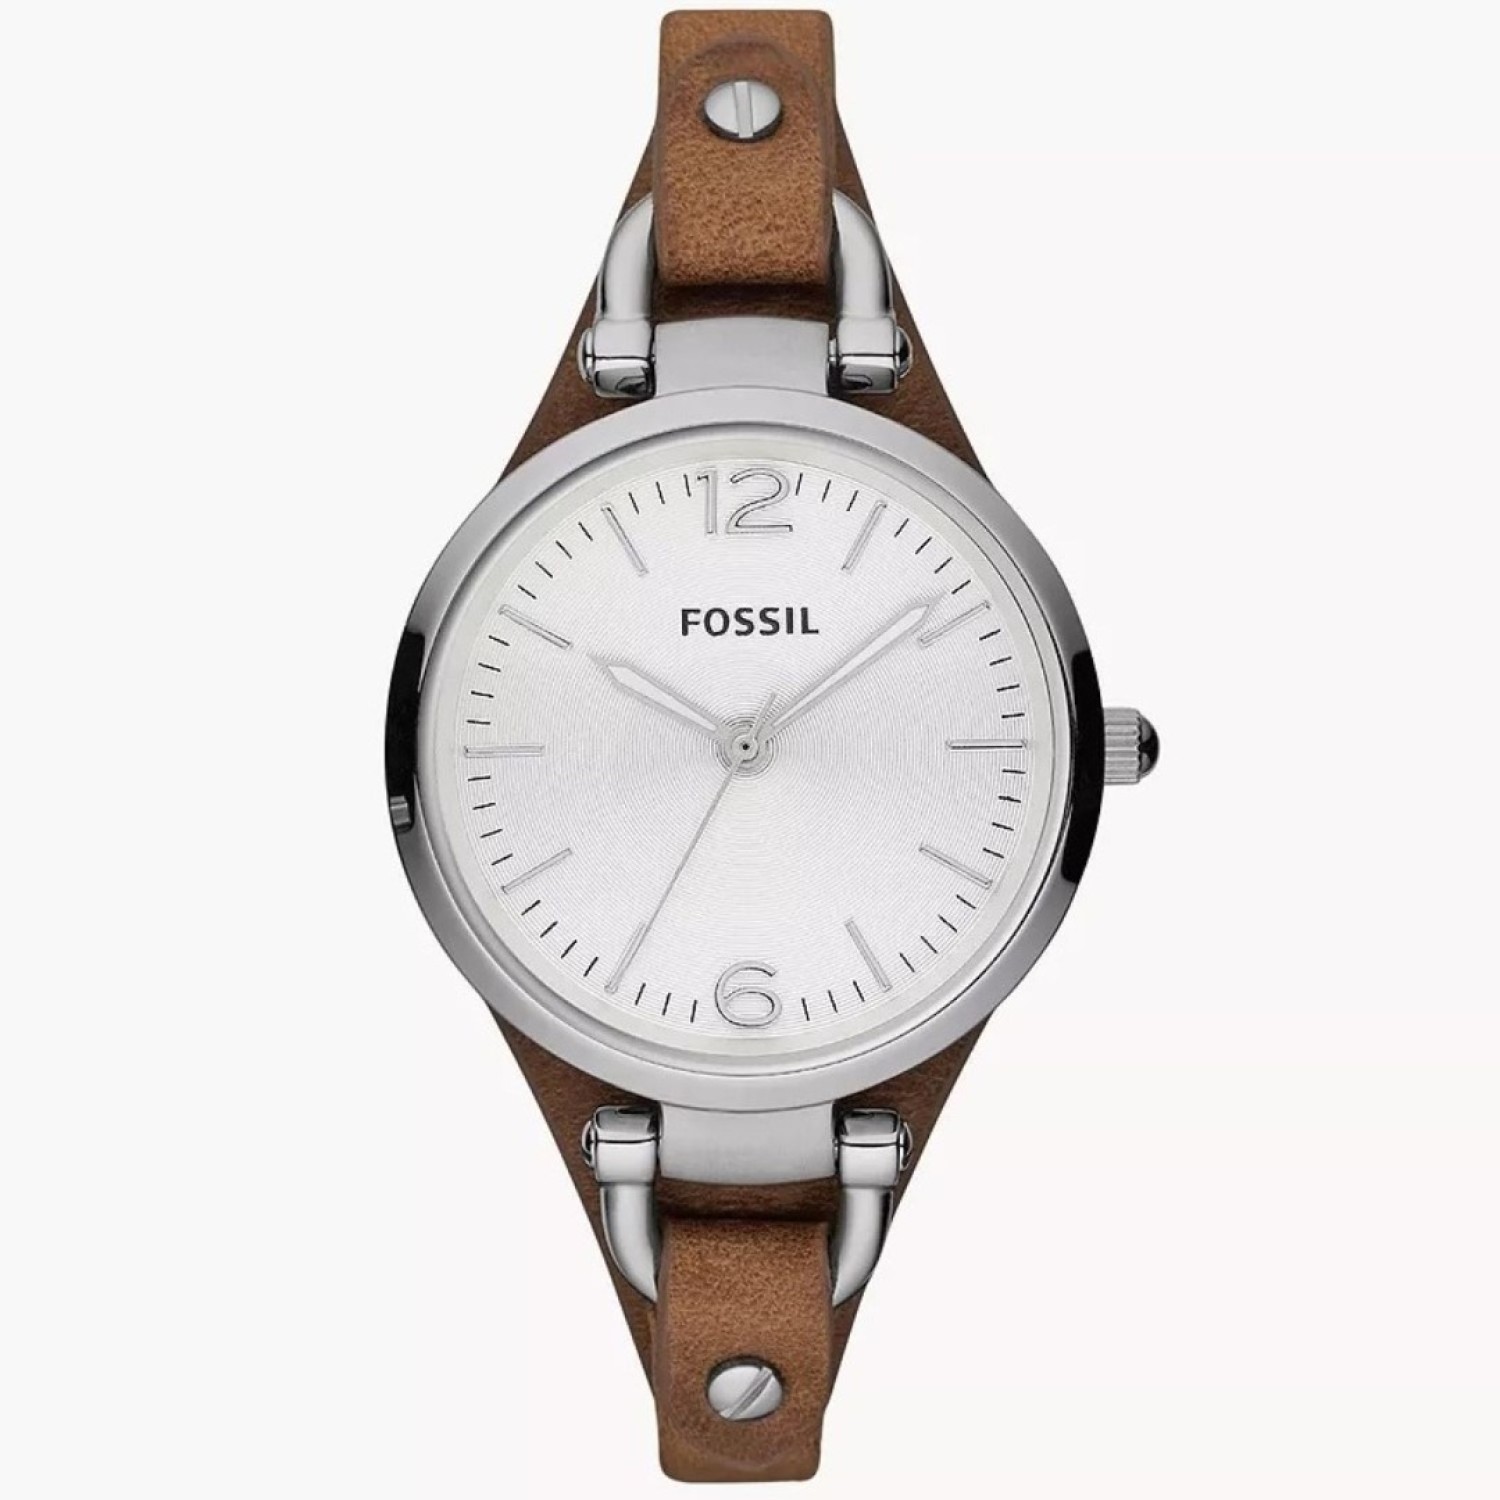 ES3060 Fossil Georgia Brown Leather Watch. The round face of this watch is boyfriend-inspired, but the slim leather strap makes it perfectly feminine. This Georgia watch also features a three hand movement Humm -Buy Little things up to $1000 and choose @c